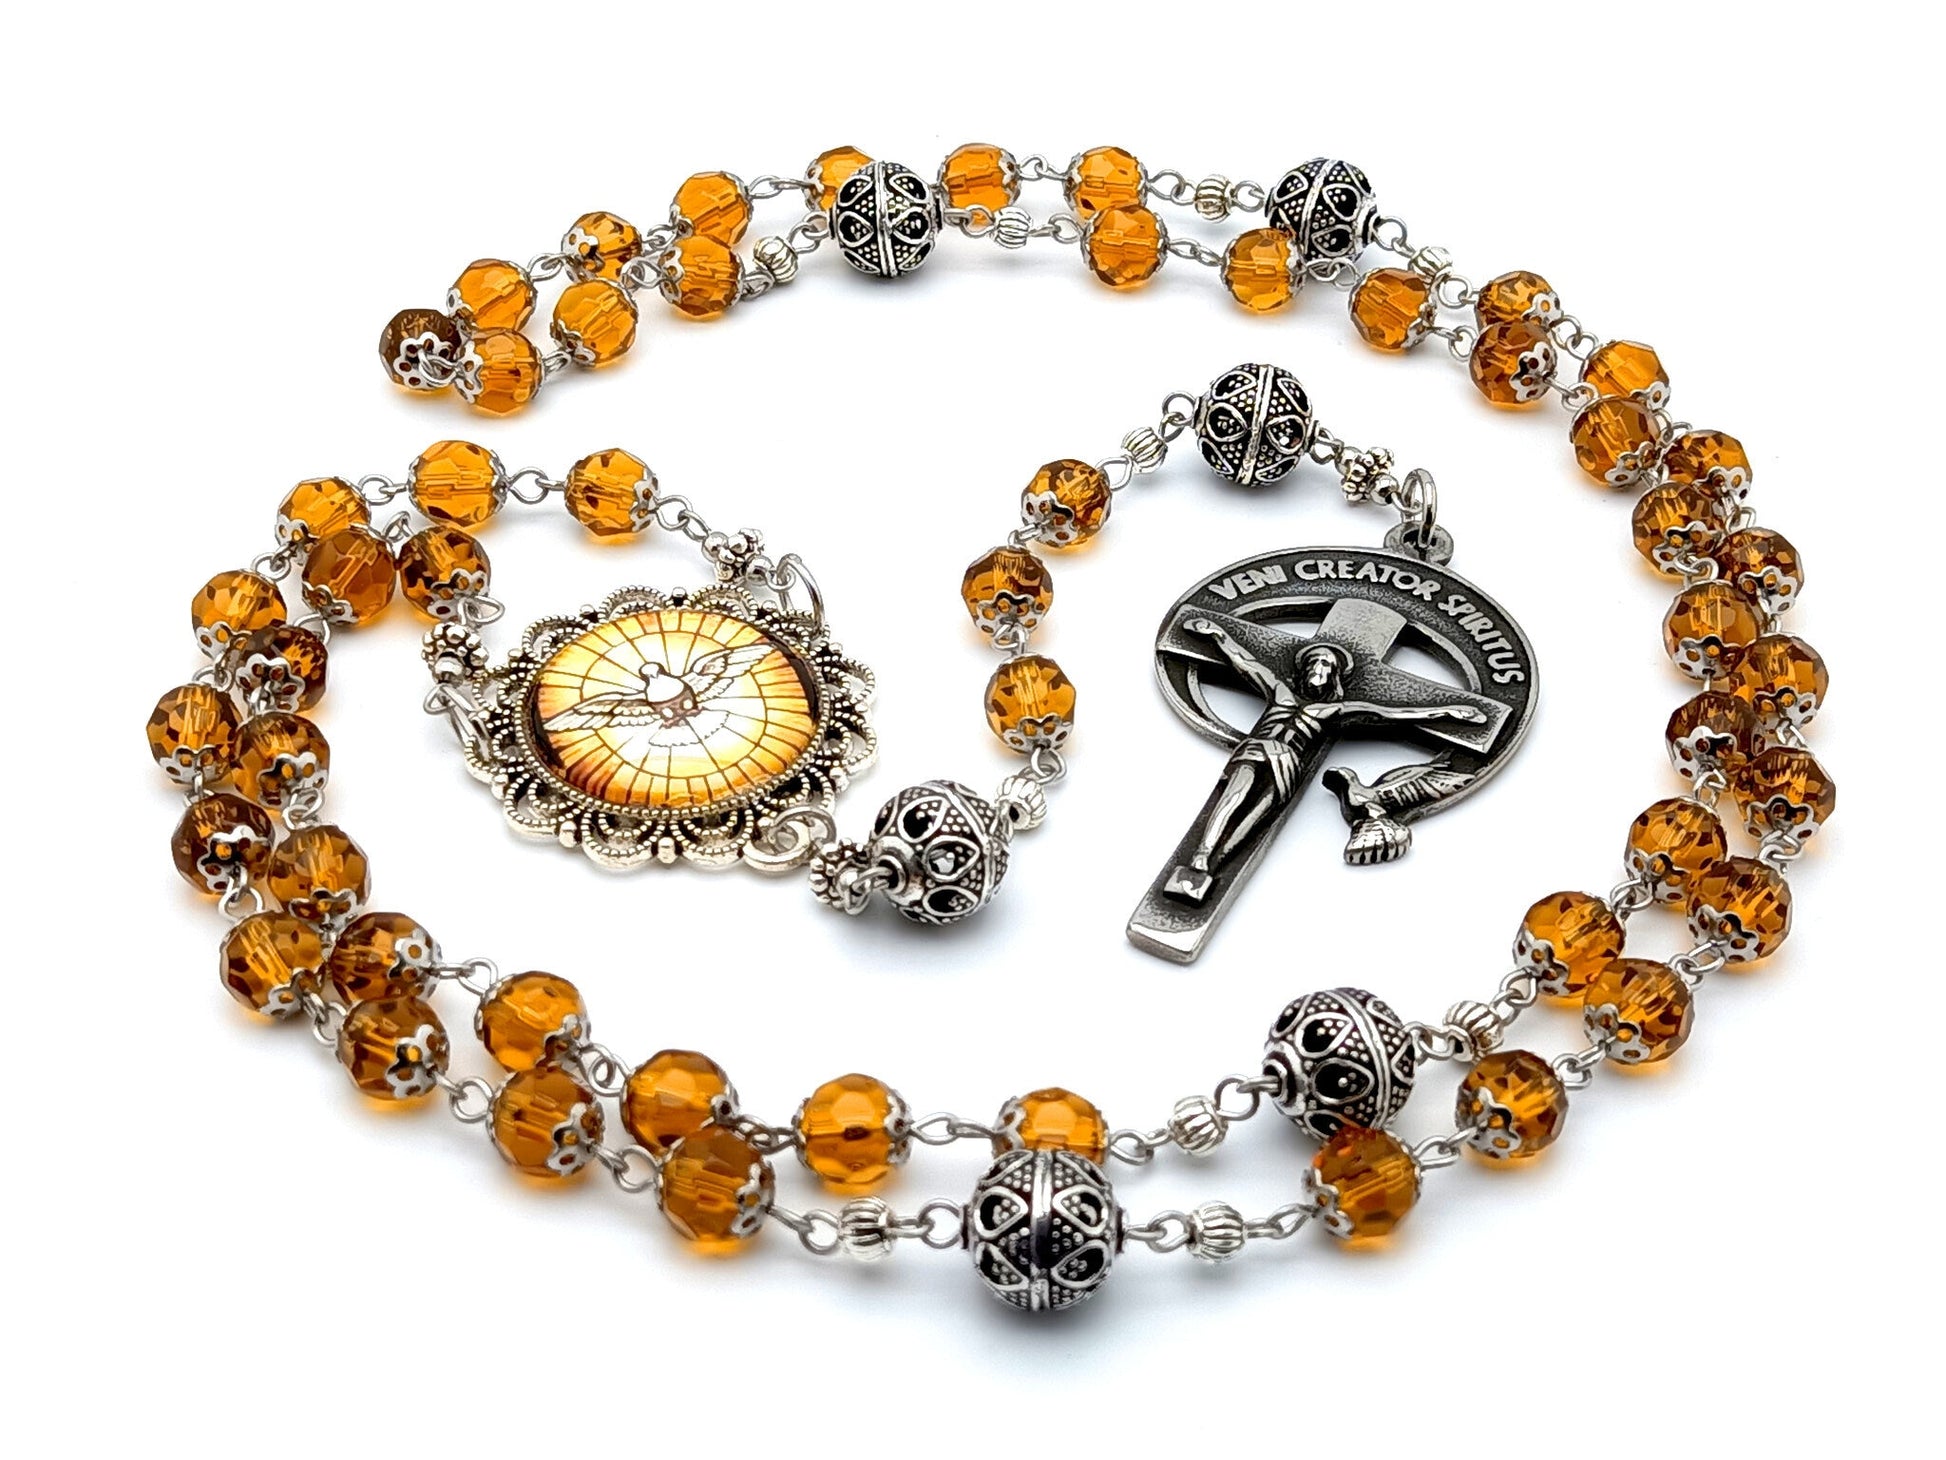 Holy Spirit unique rosary beads with amber faceted glass and silver beads, Holy Spirit crucifix and picture centre medal.